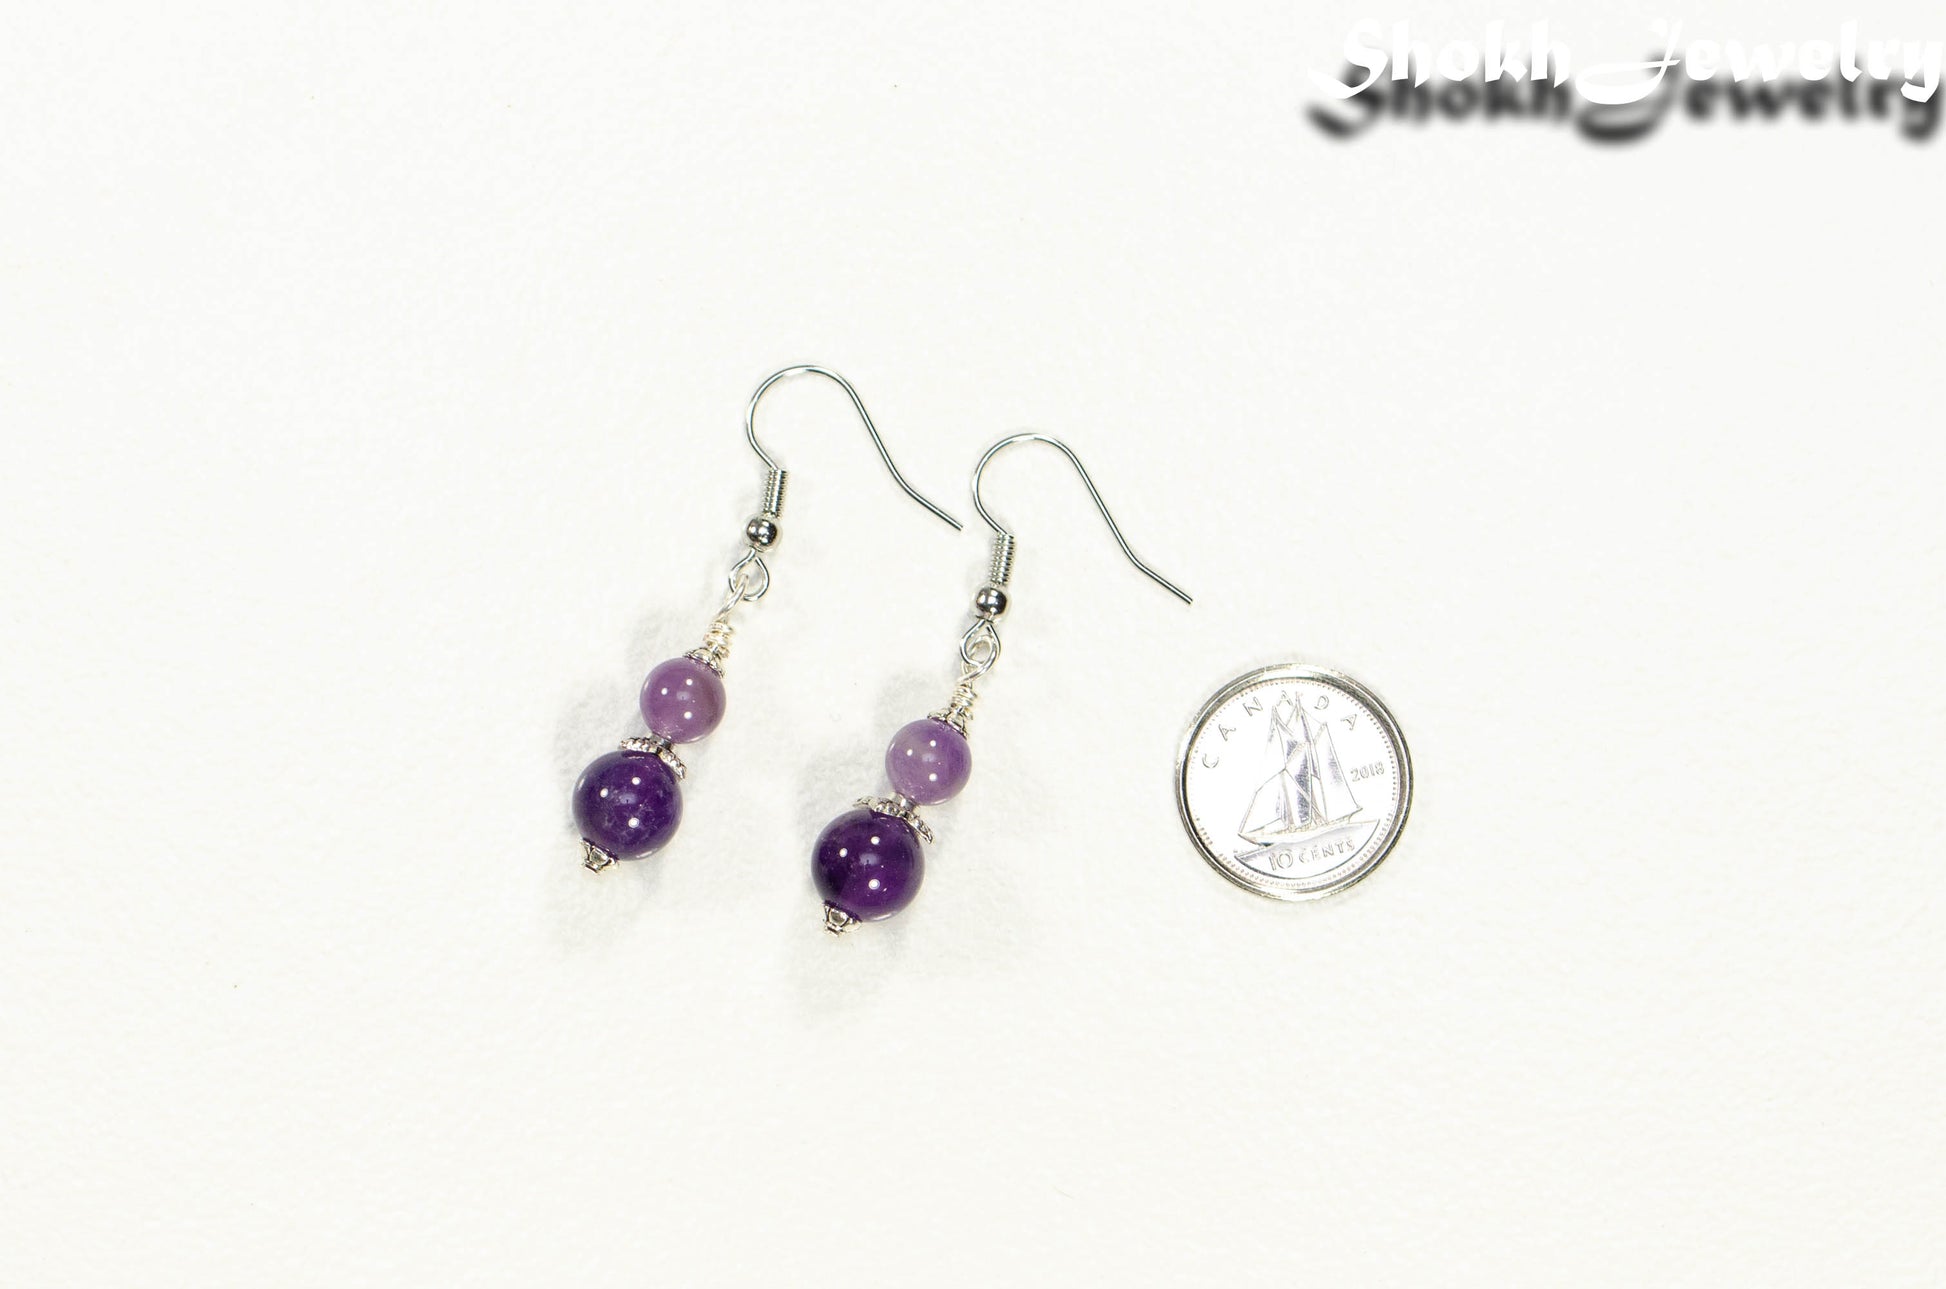 Small Natural Amethyst Crystal Earrings beside a dime